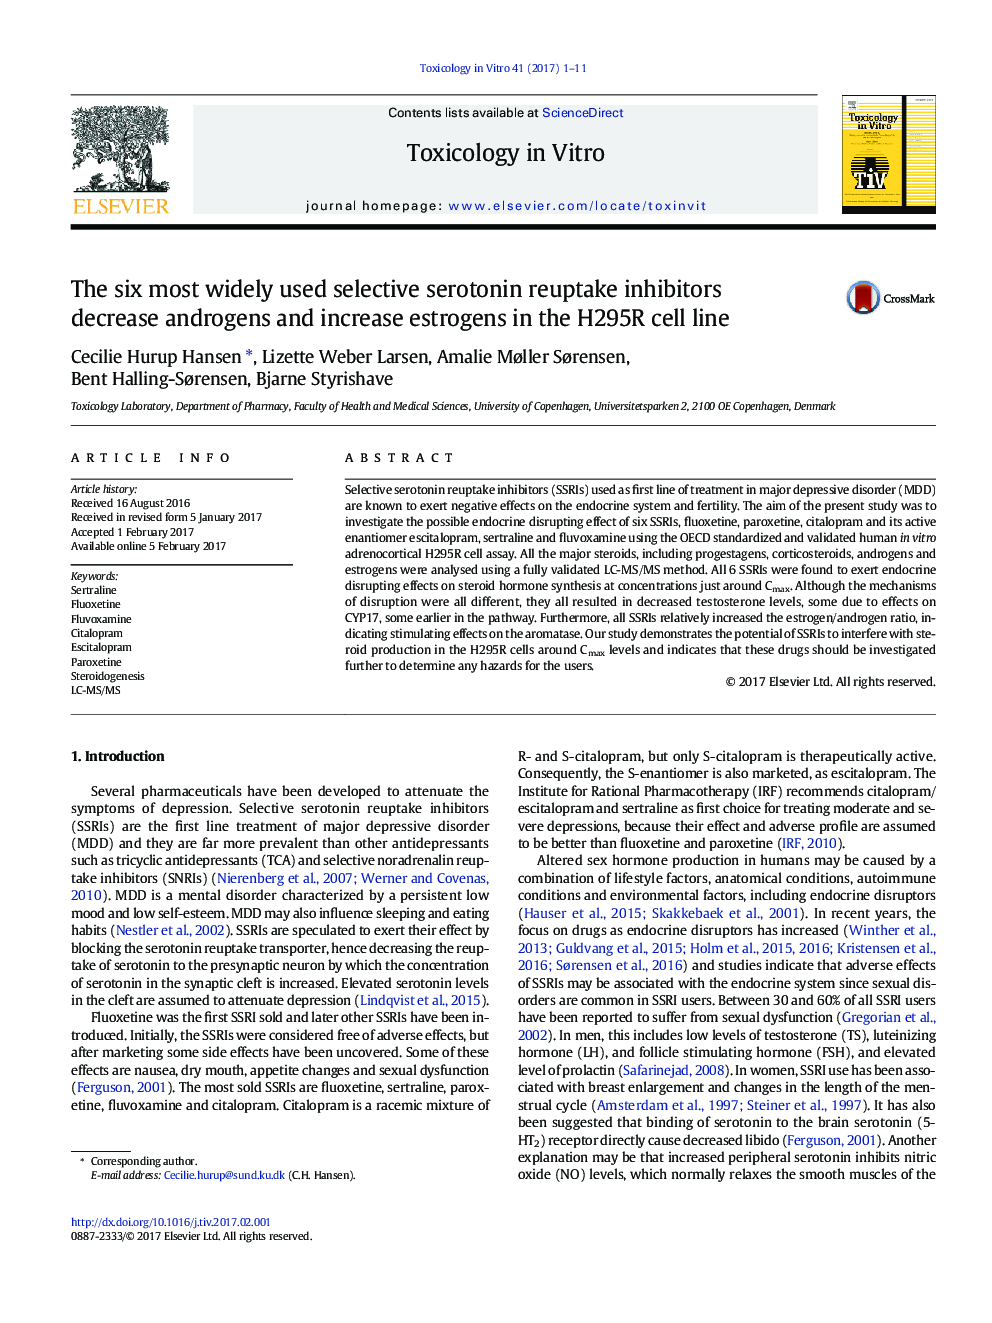 The six most widely used selective serotonin reuptake inhibitors decrease androgens and increase estrogens in the H295R cell line